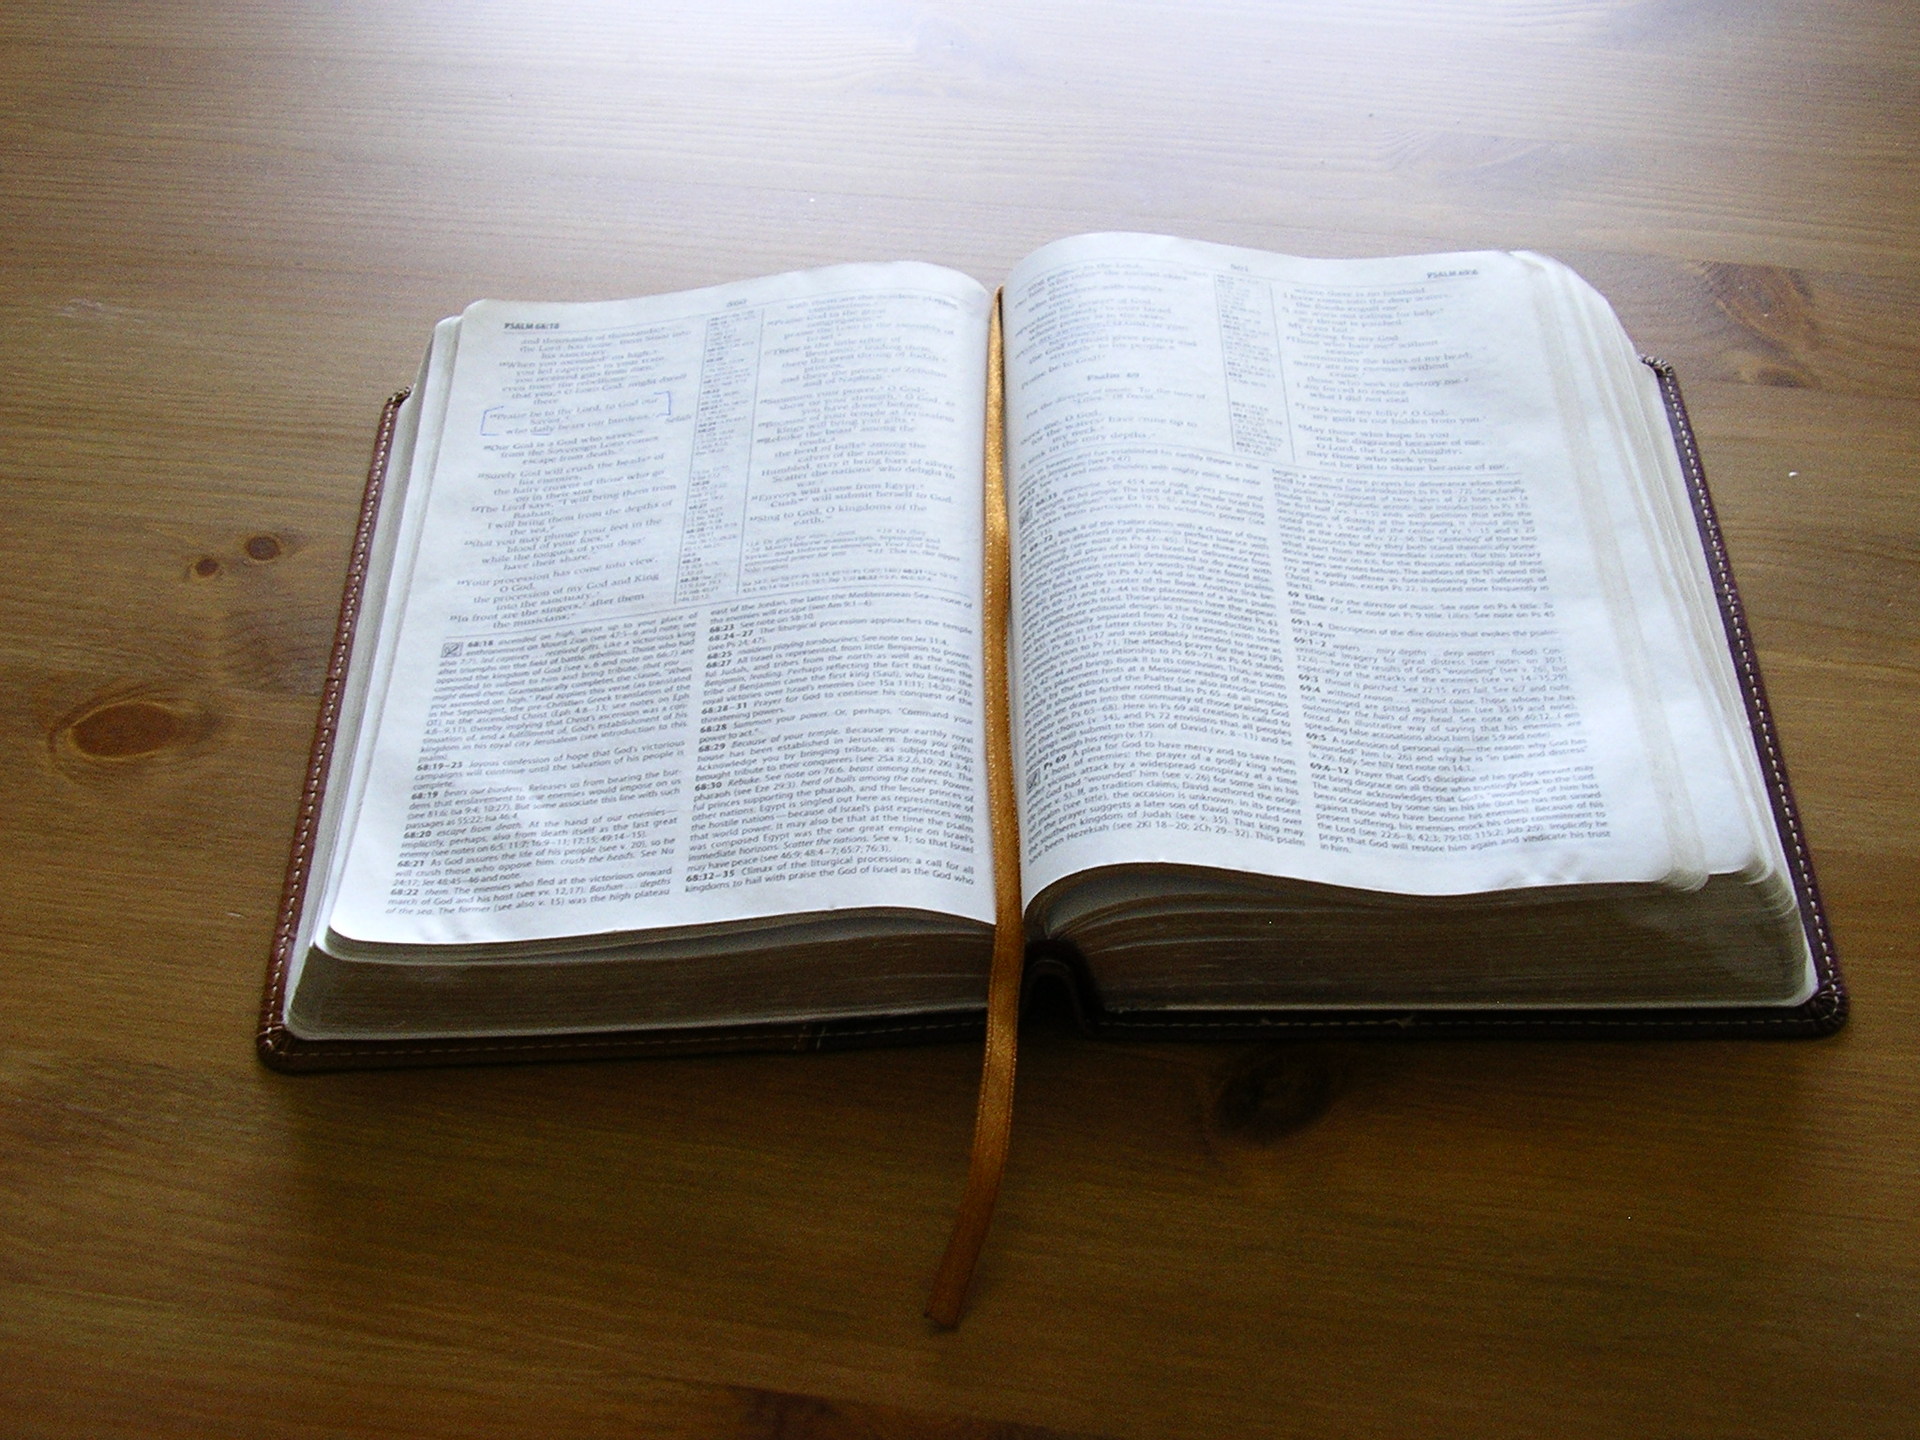 pictures of a bible open